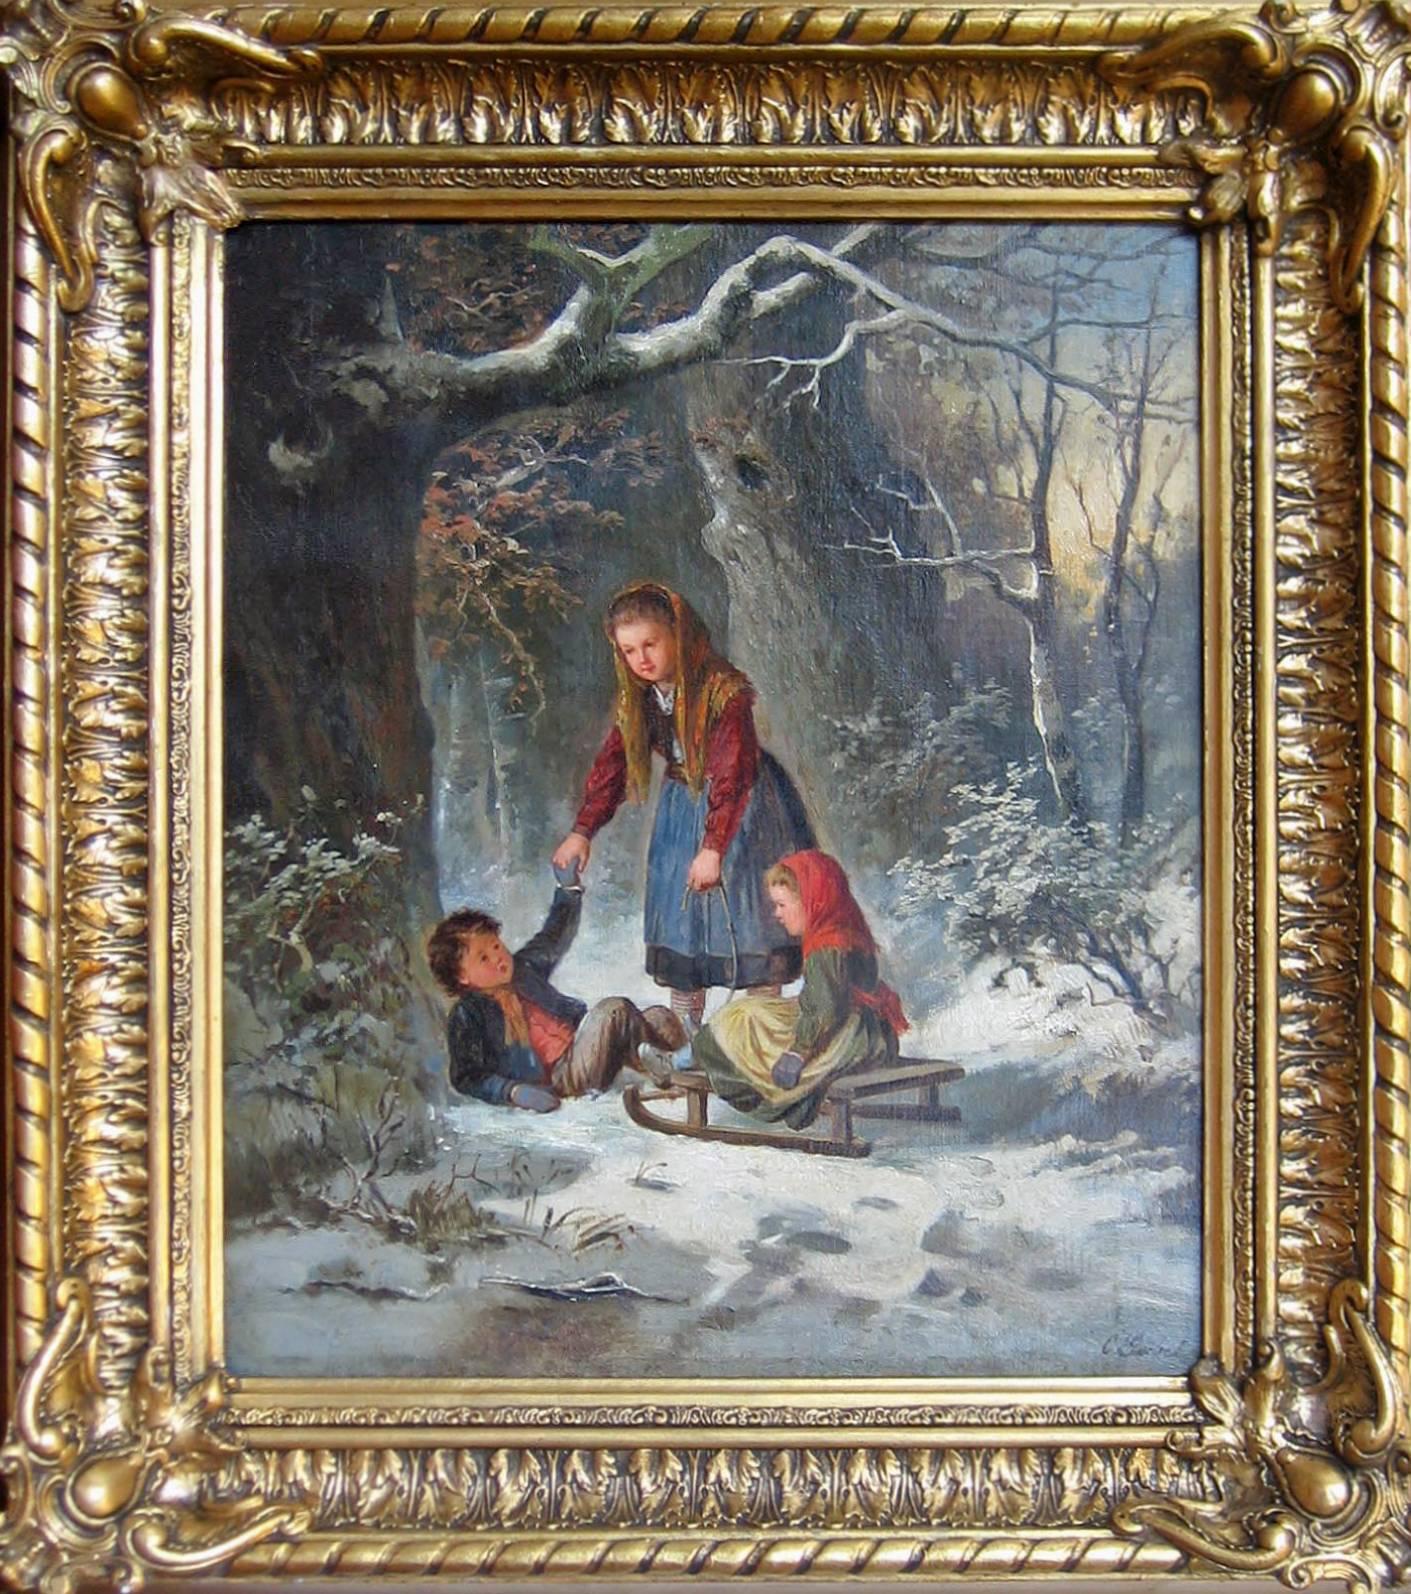 Carl Goebel Figurative Painting - Winter Landscape with 3 Children, Sleigh Ride Genre Painting by Reknown Artist